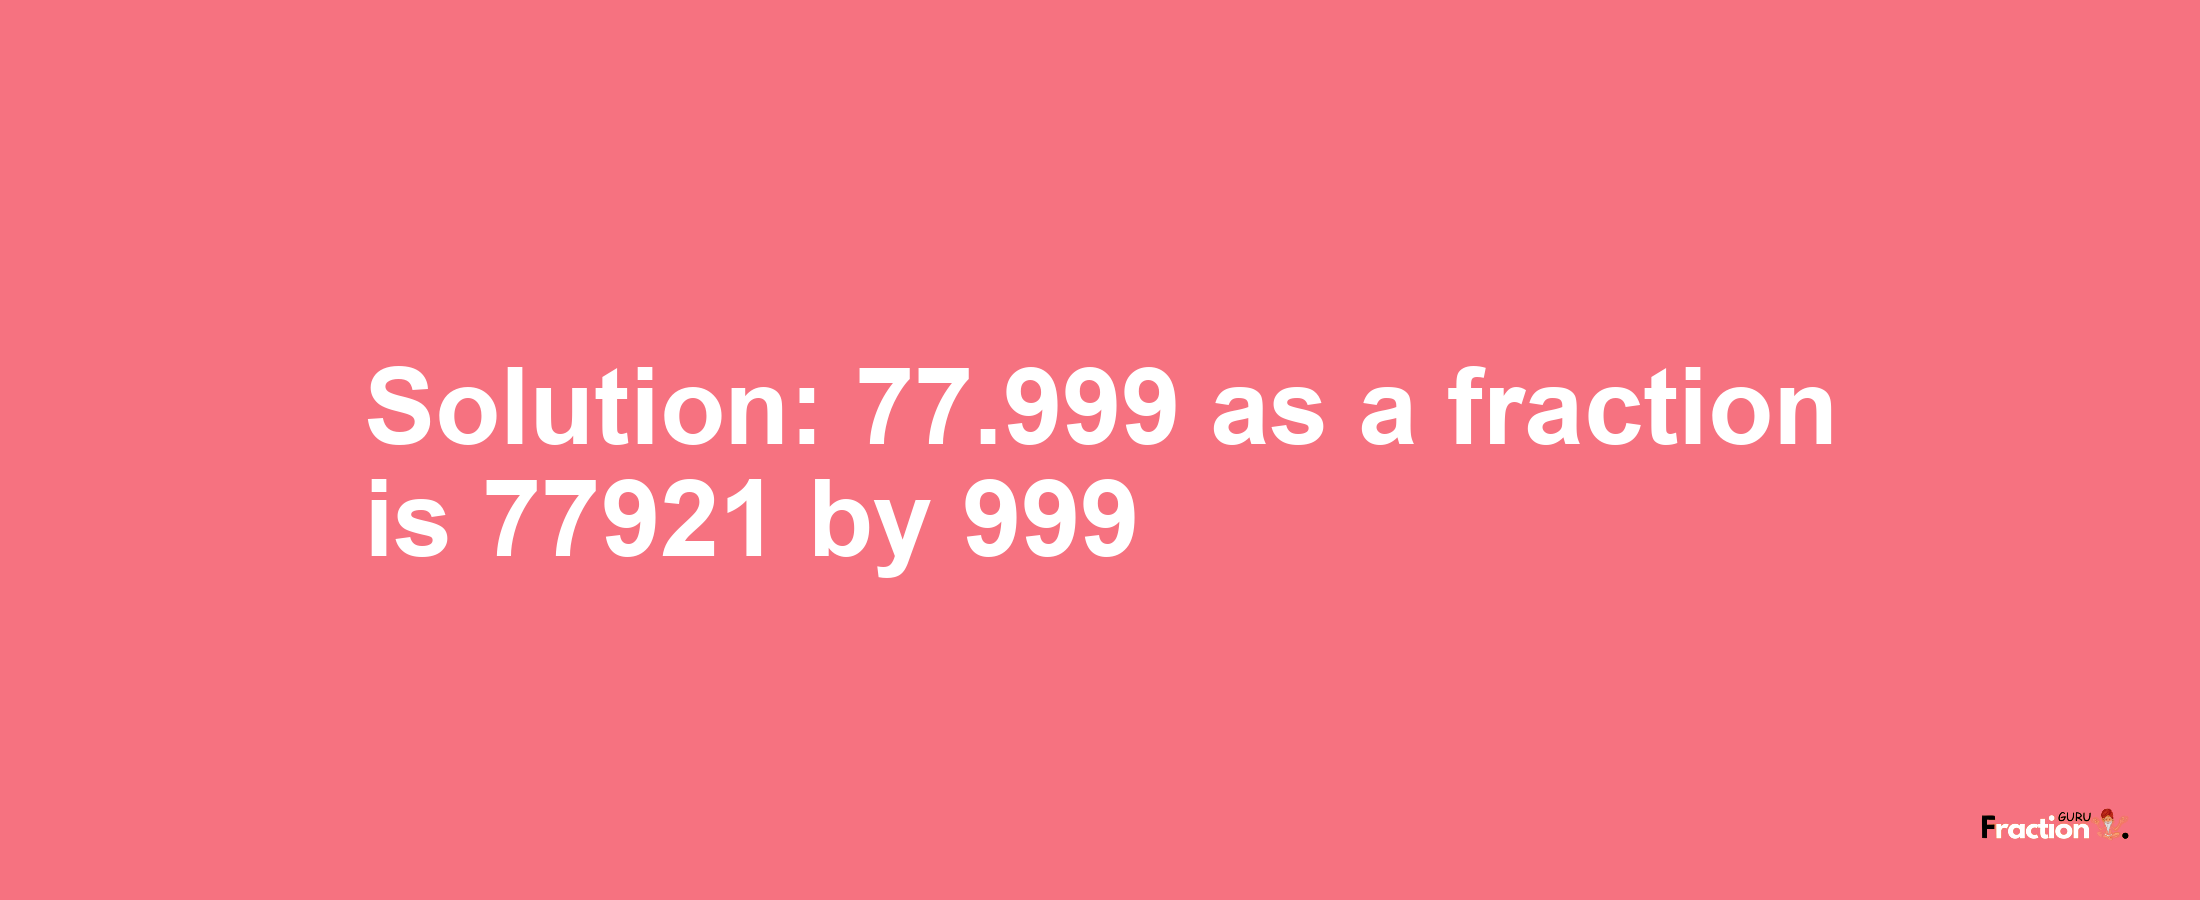 Solution:77.999 as a fraction is 77921/999